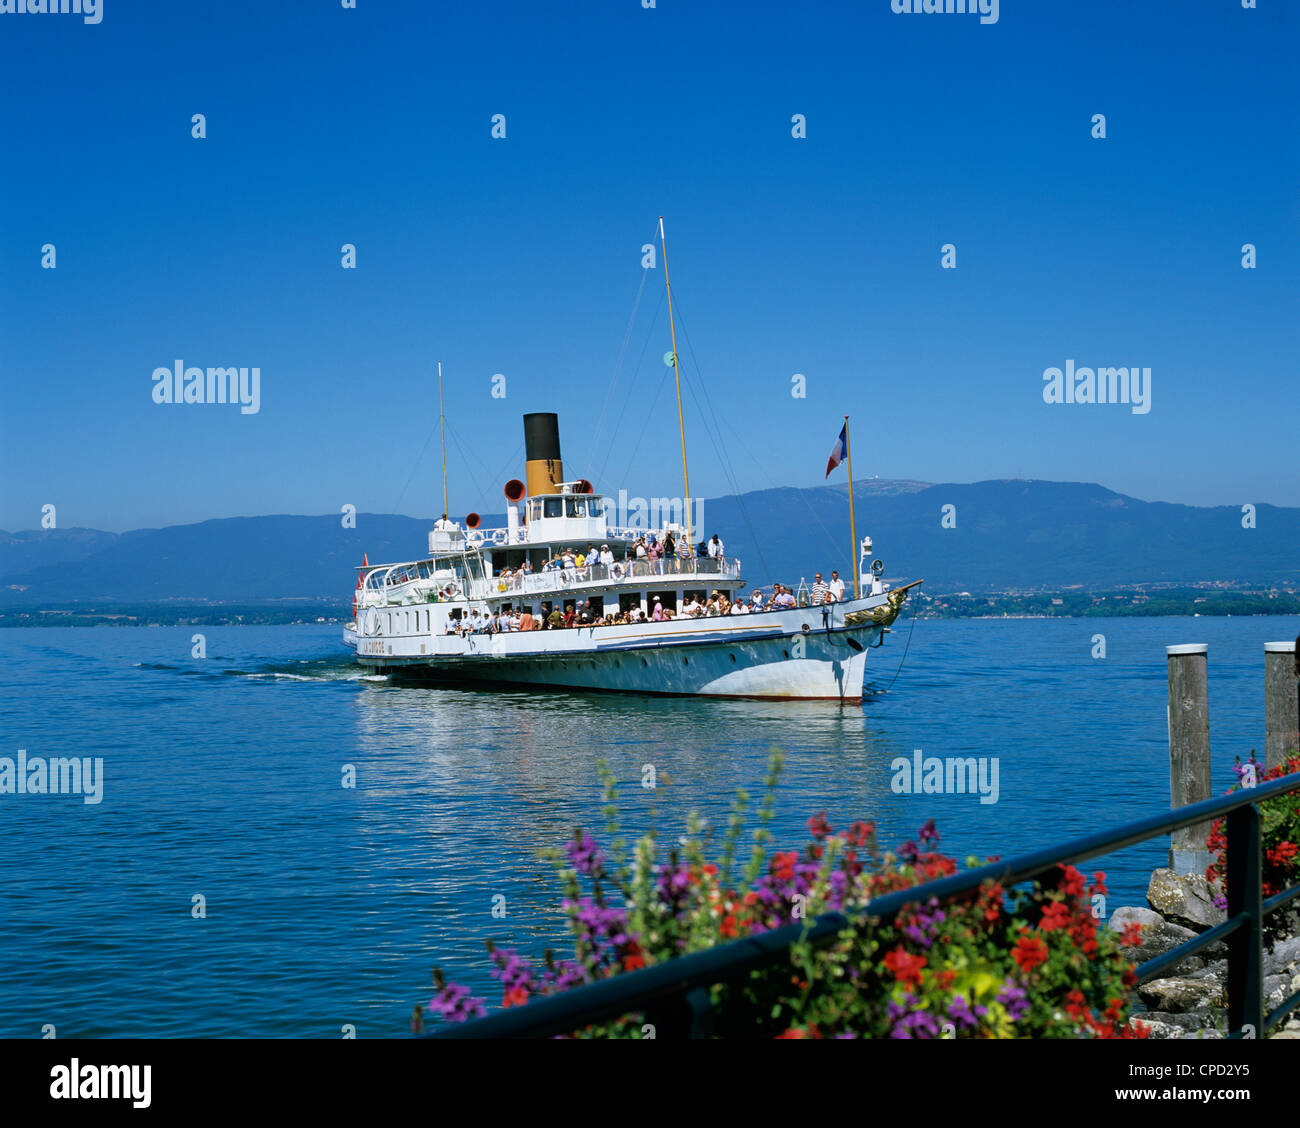 La Suisse traditionelle See ferry, Yvoire, Genfer See, Rhone-Alpes, Frankreich Stockfoto